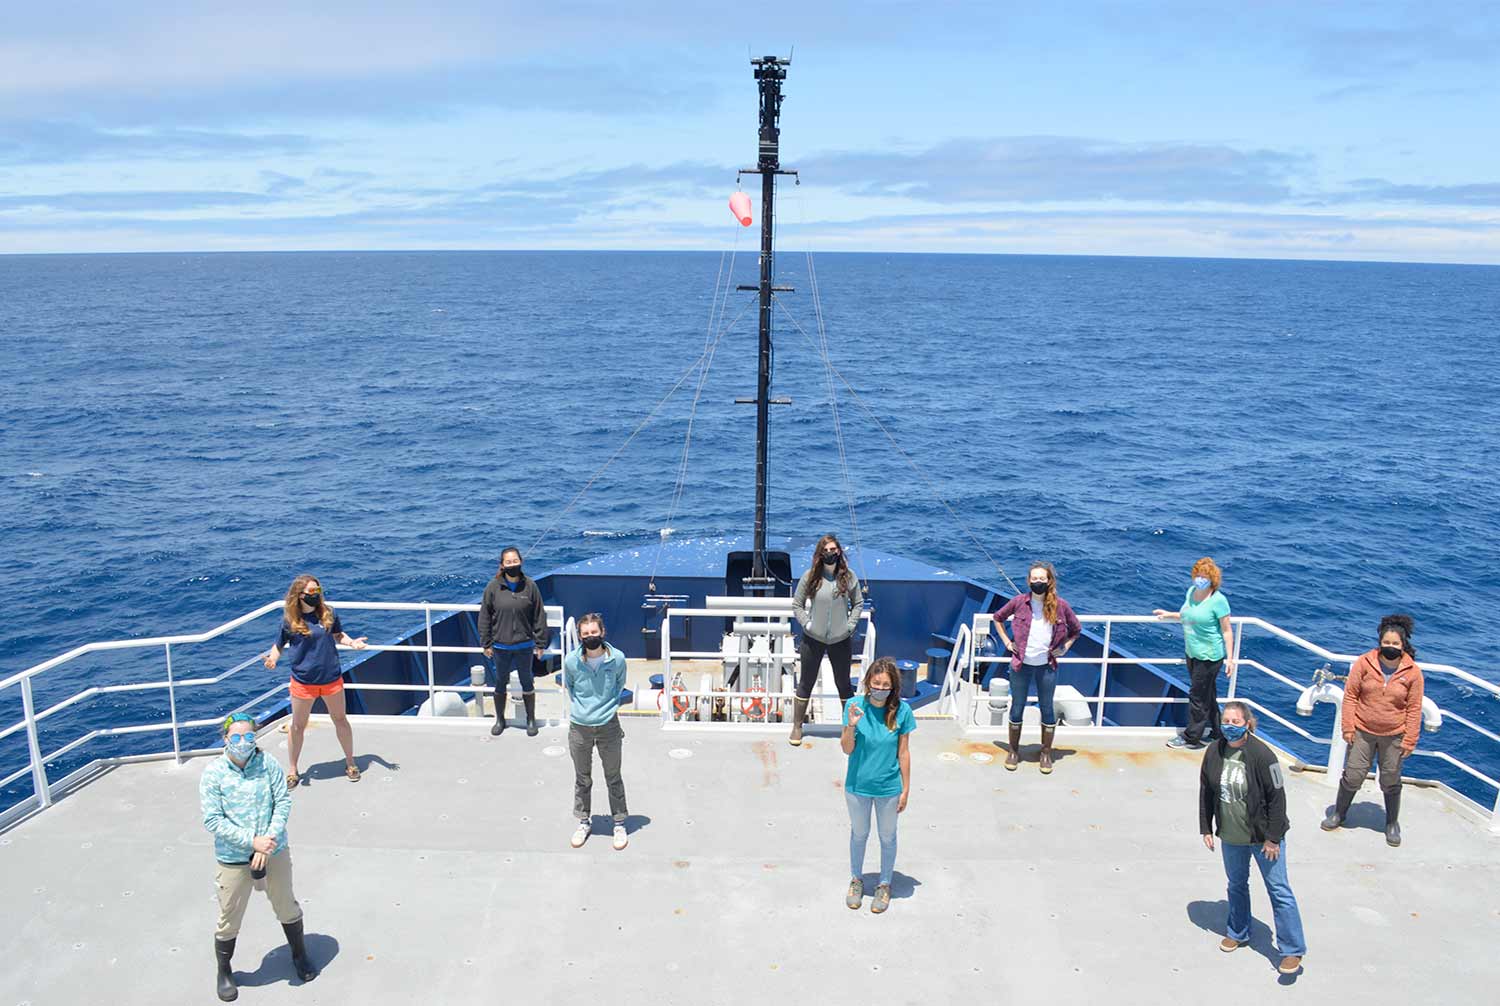 Women on Sally Ride vessel posing for photo